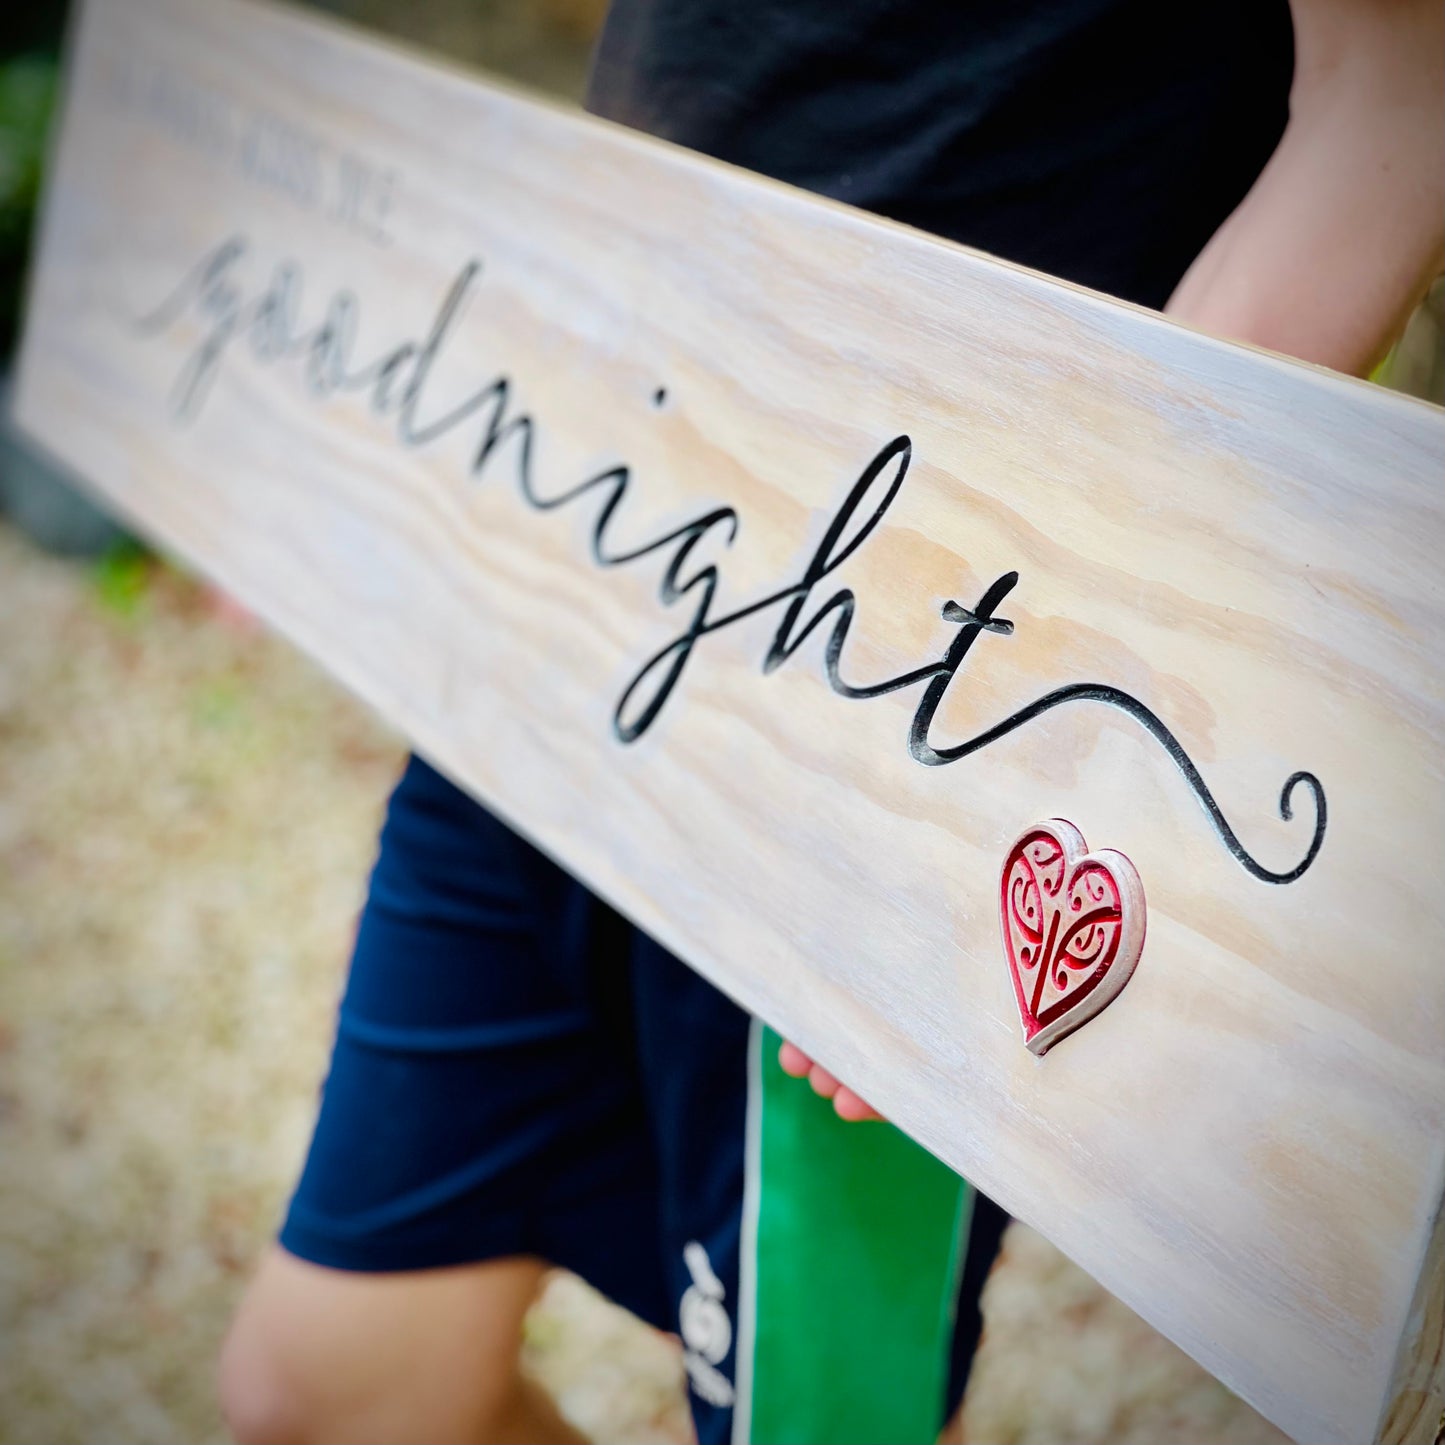 "Always Kiss Me Goodnight" Wooden Sign - Large